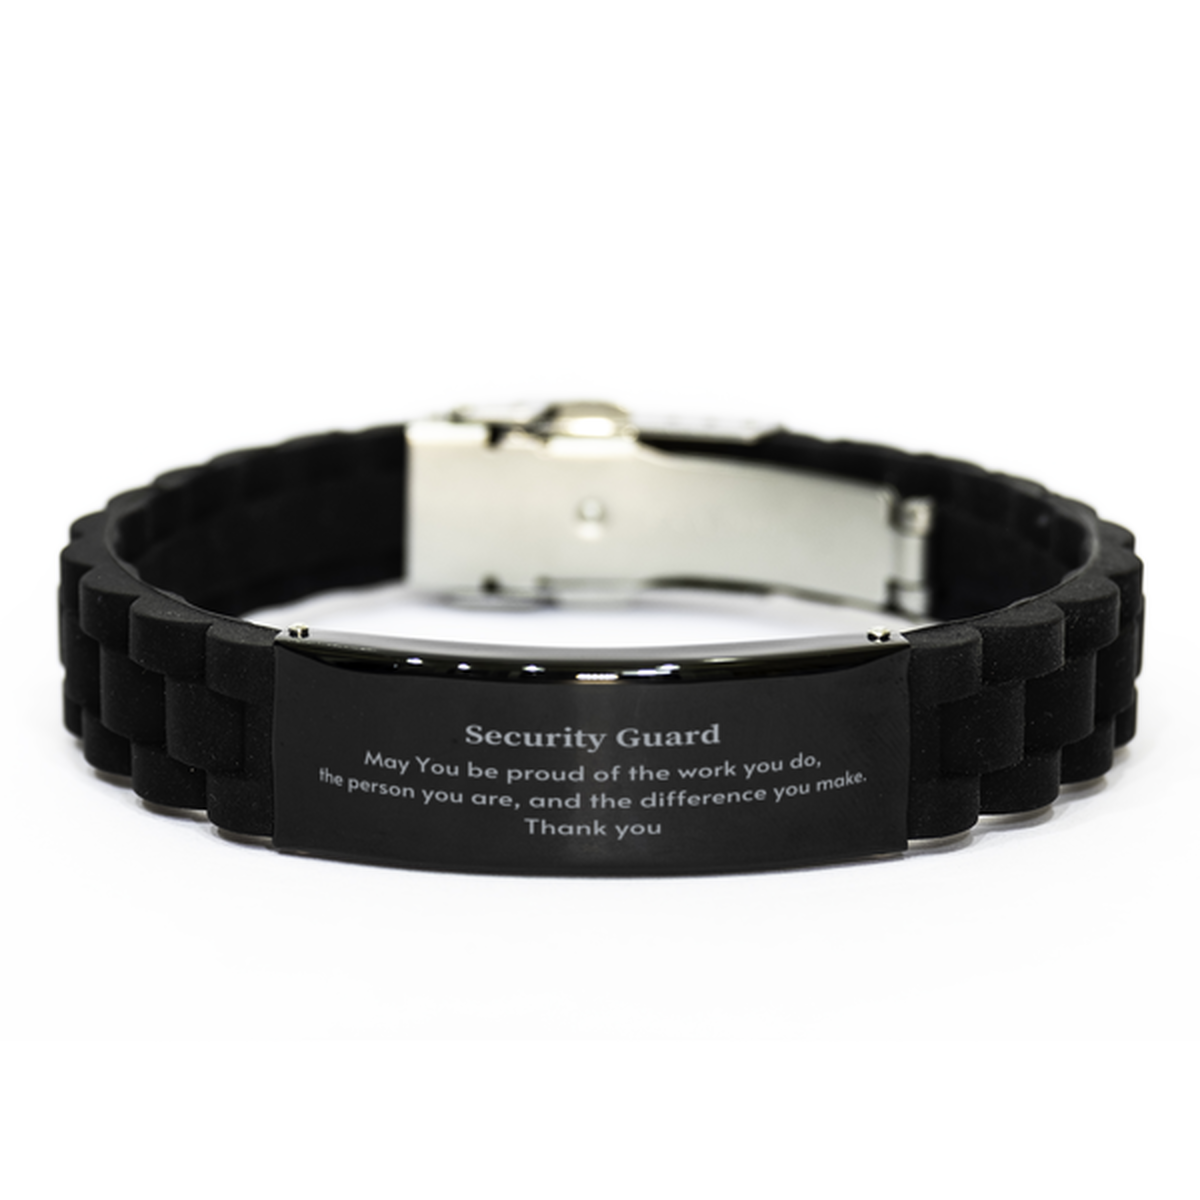 Heartwarming Black Glidelock Clasp Bracelet Retirement Coworkers Gifts for Security Guard, Security Guard May You be proud of the work you do, the person you are Gifts for Boss Men Women Friends